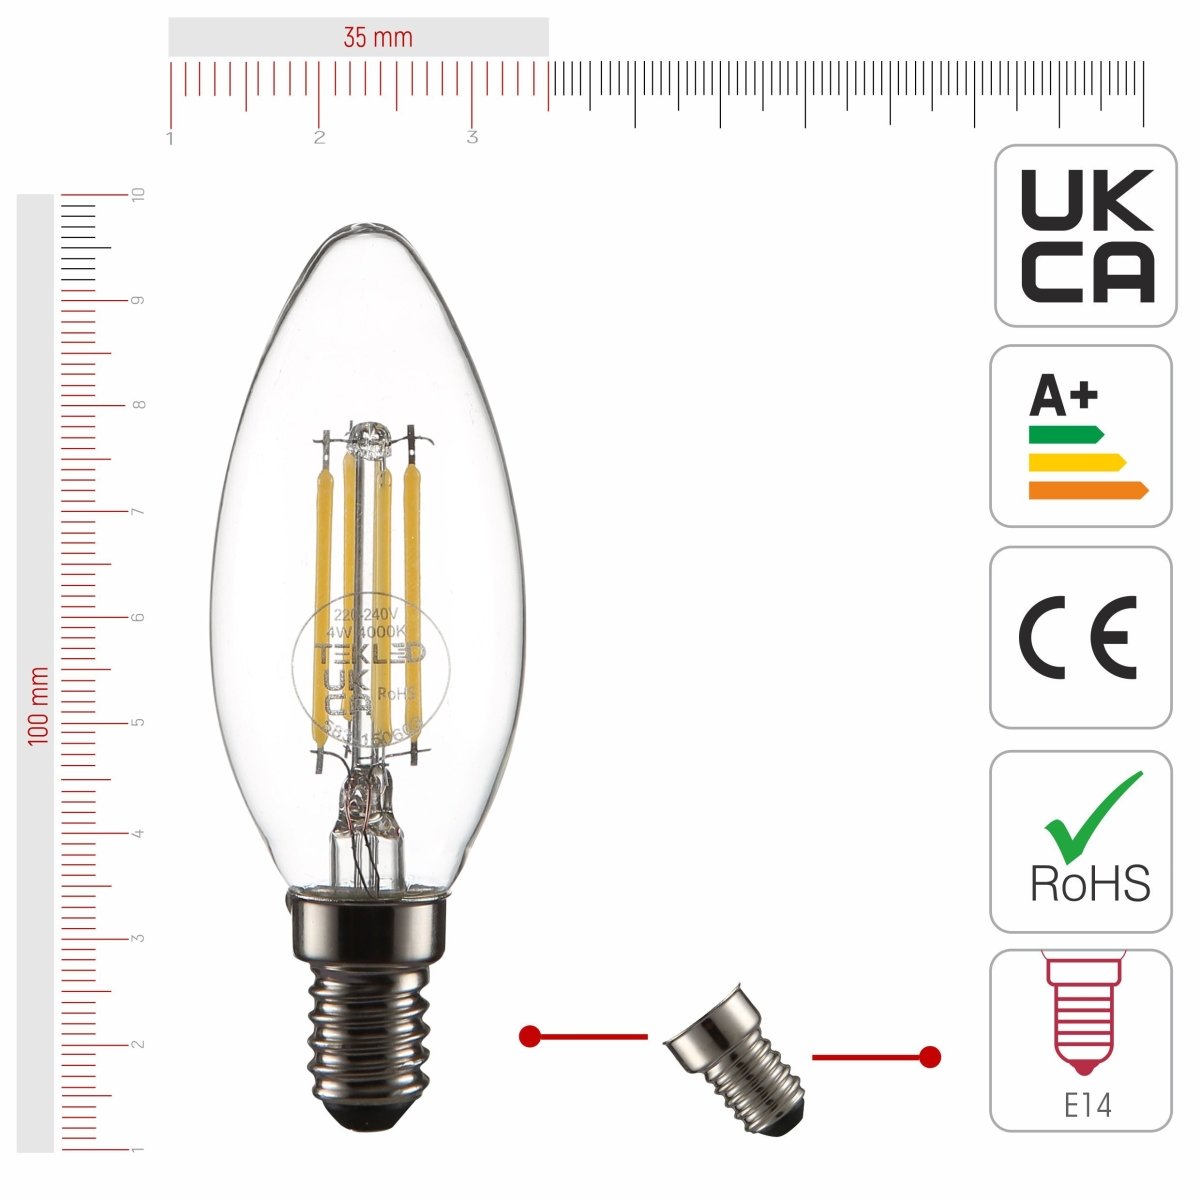 Size and certifications of LED Filament Bulb C35 Candle E14 Small Edison Screw 4W 470lm Cool White 4000K Clear Pack of 6 | TEKLED 583-150603